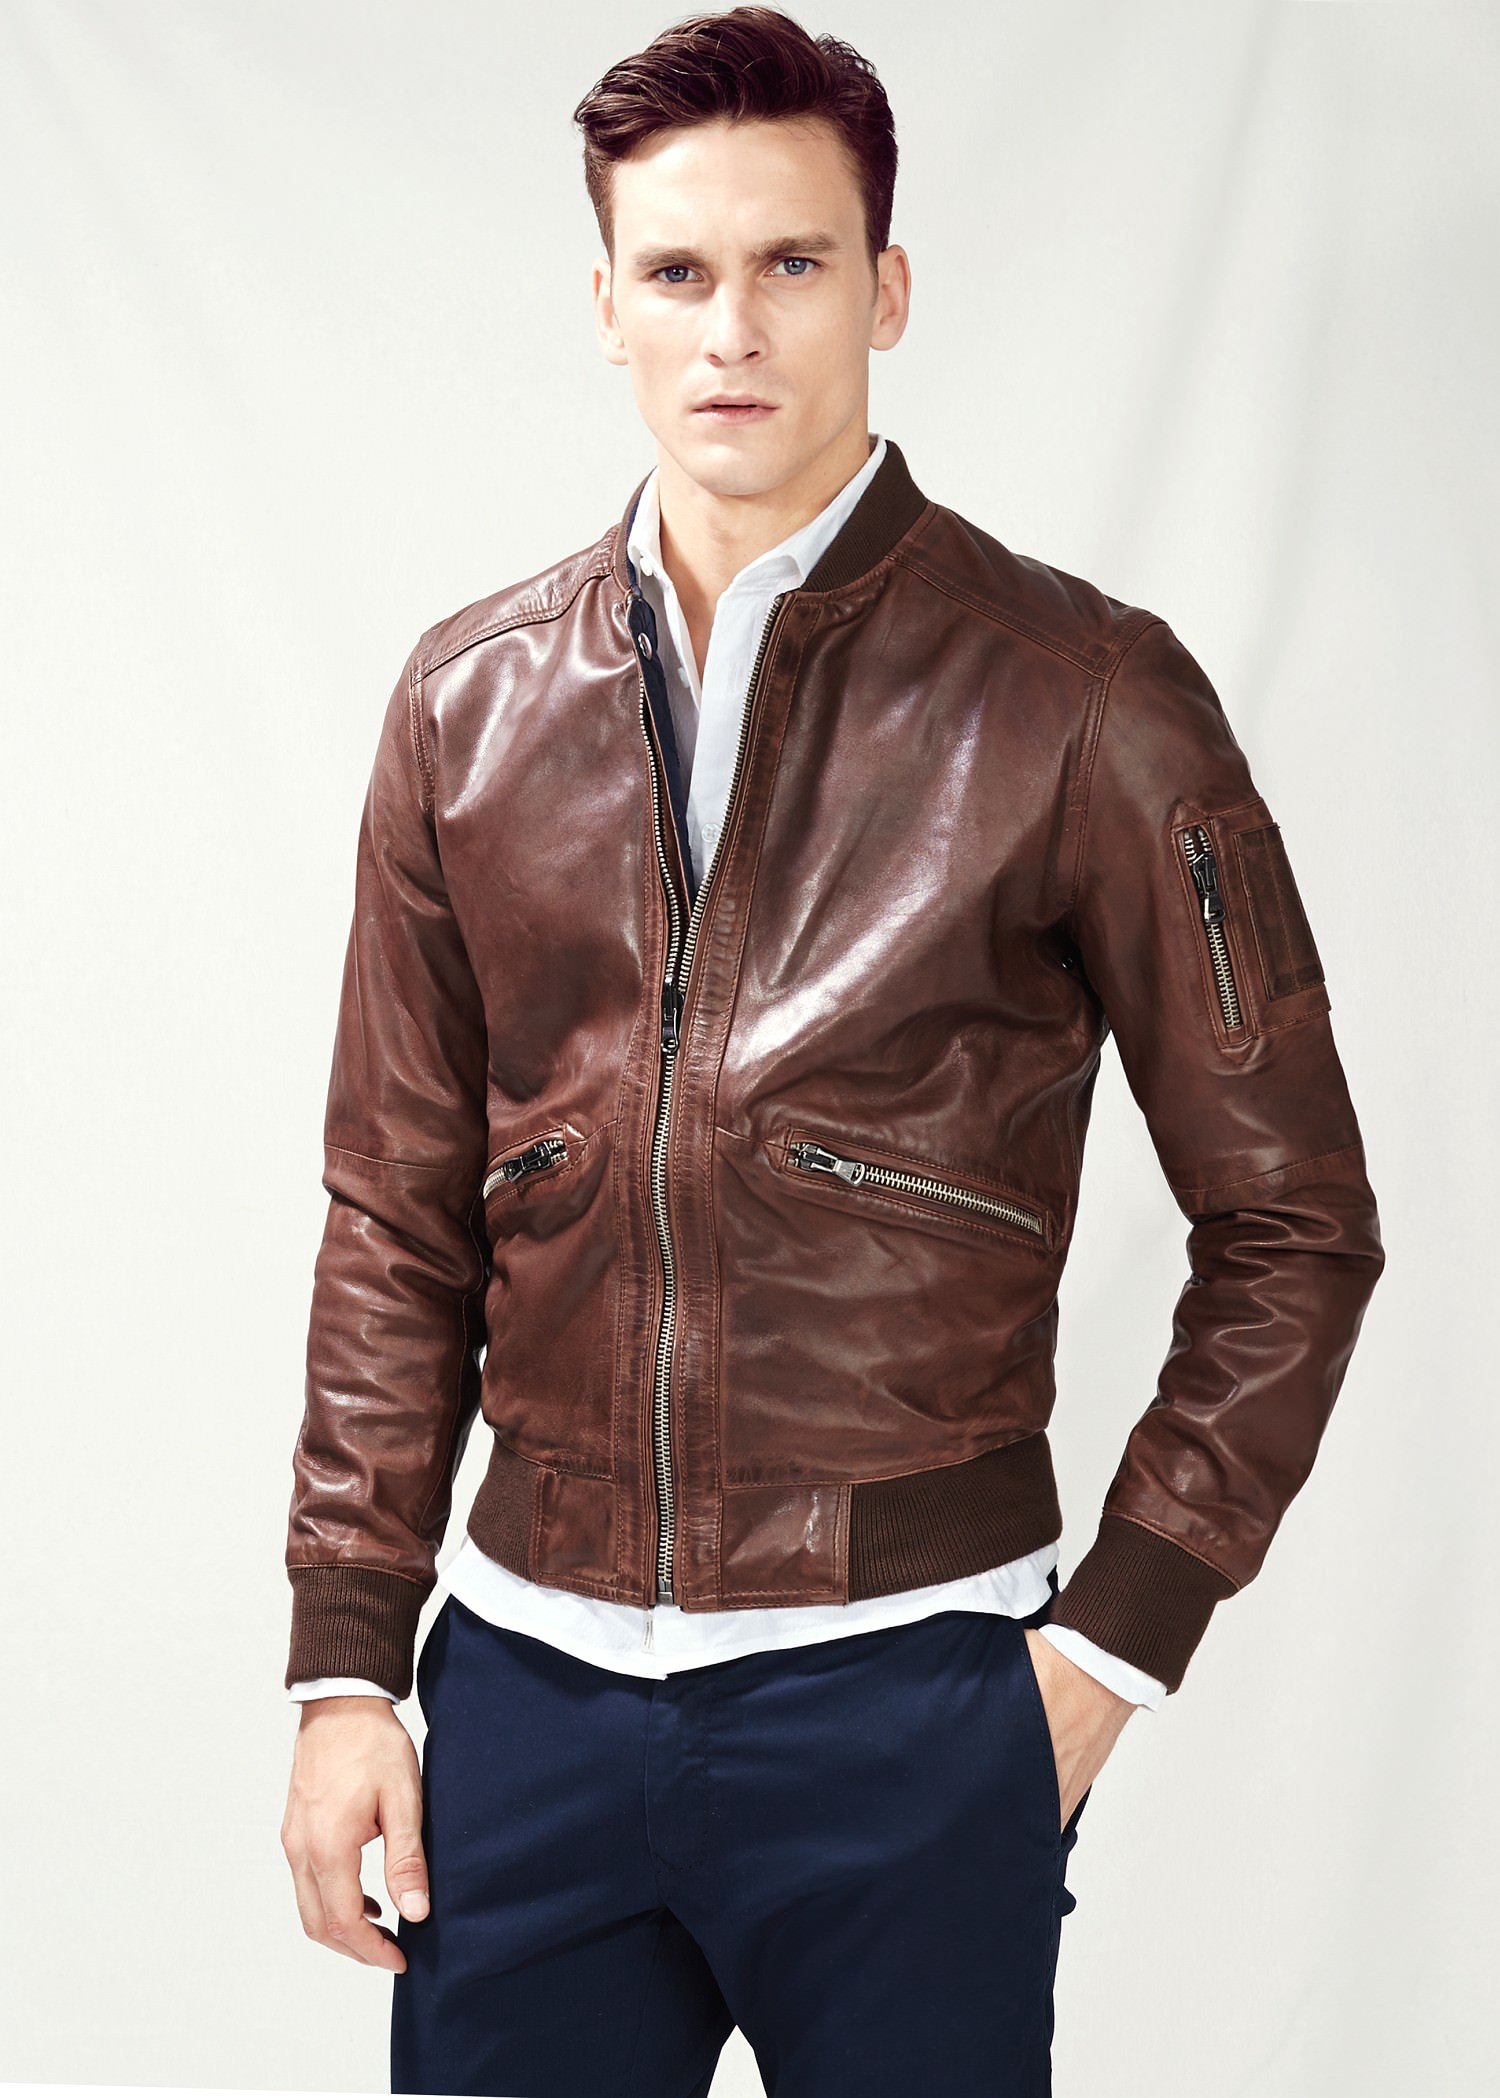 Lyst - Mango Reversible Leather Bomber Jacket in Brown for Men